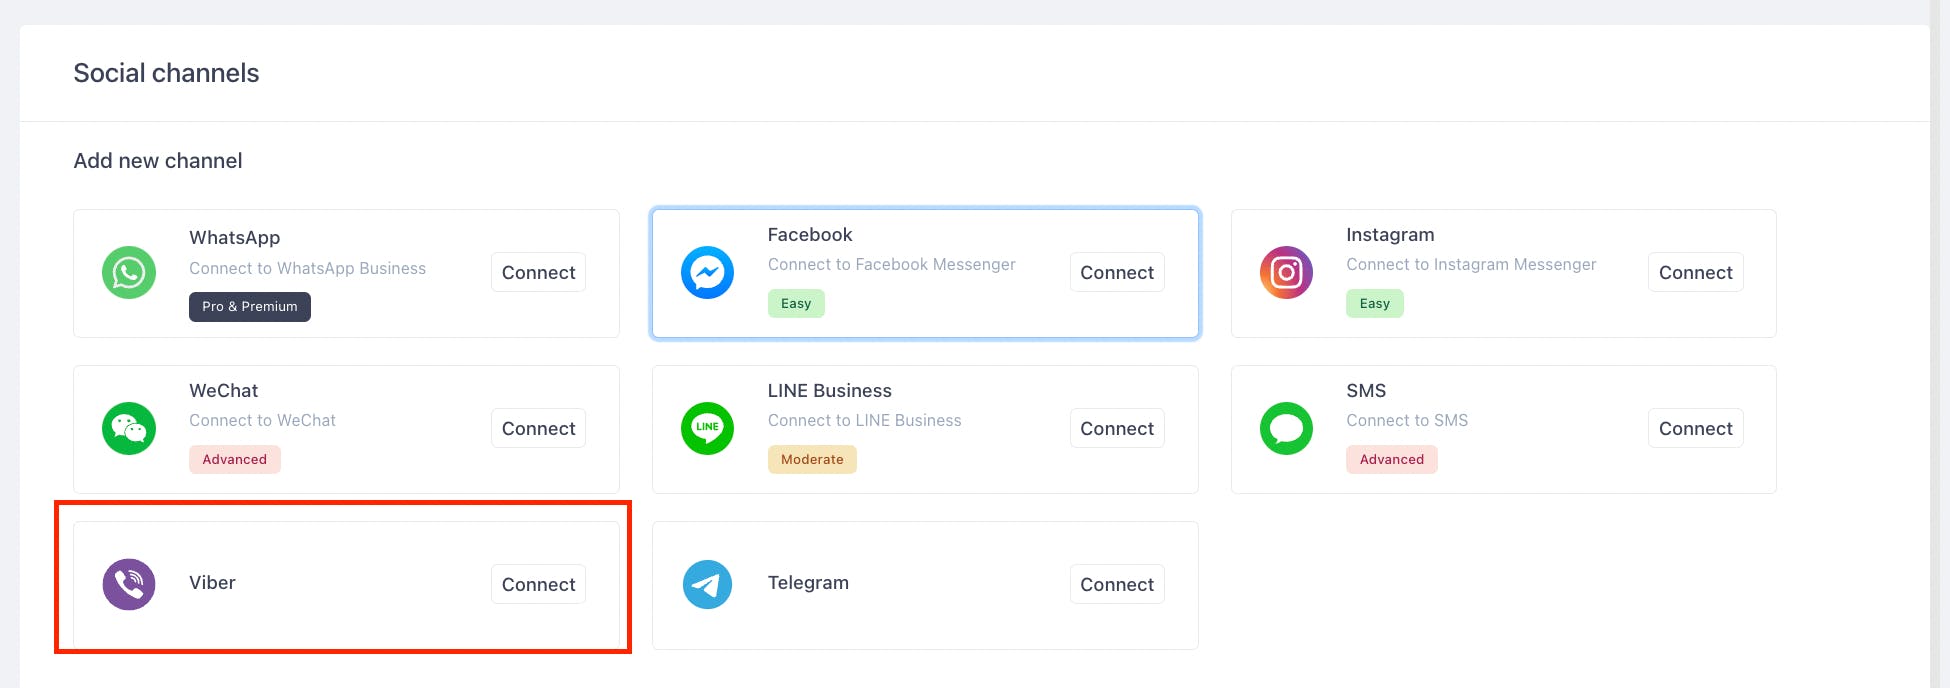 Connect to SleekFlow to manage Viber business messages